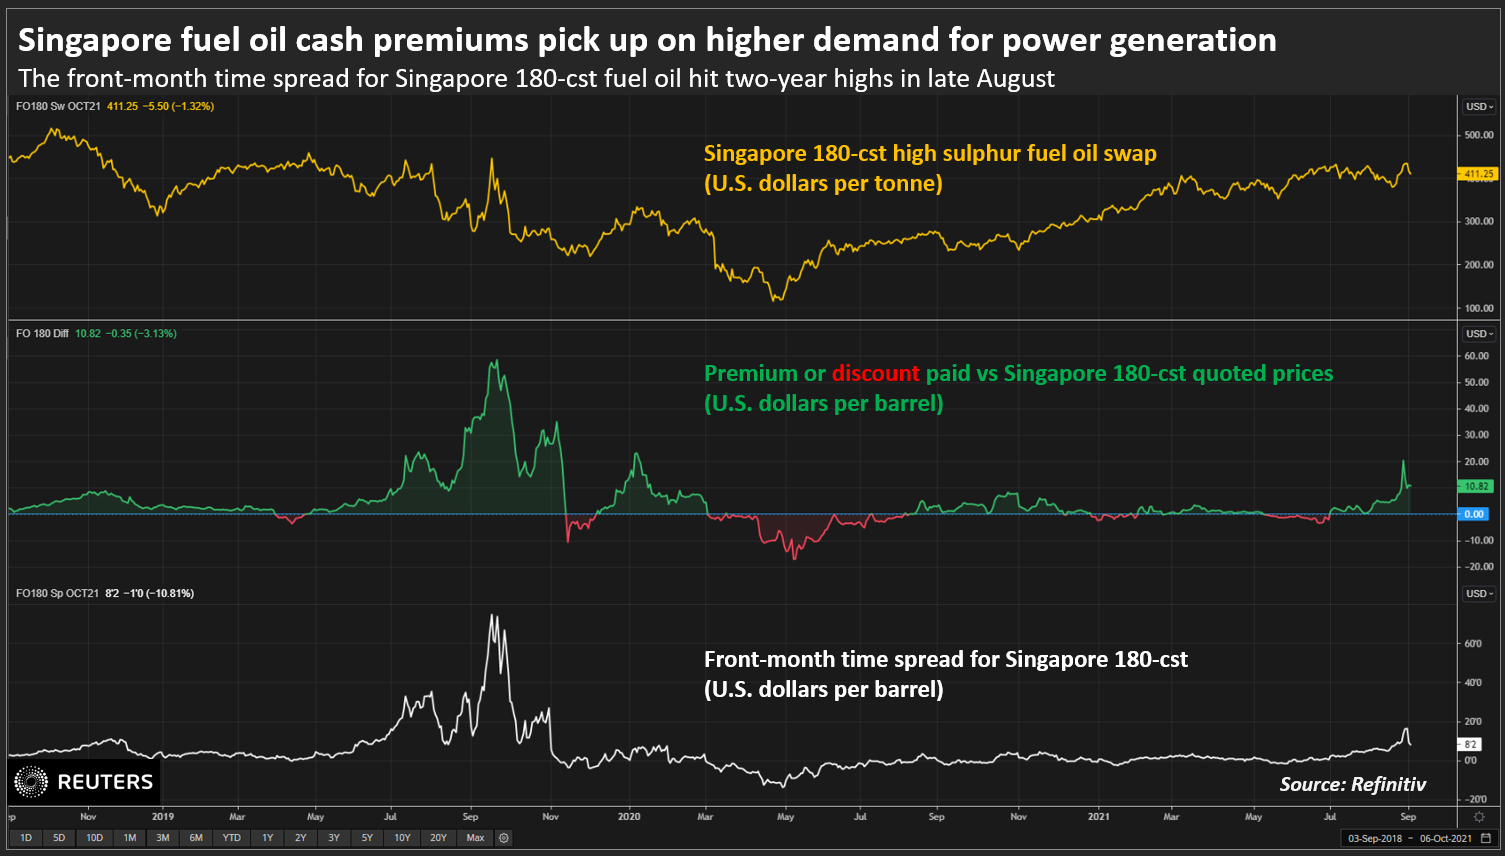 Singapore fuel oil cash premiums pick up on higher demand for power generation